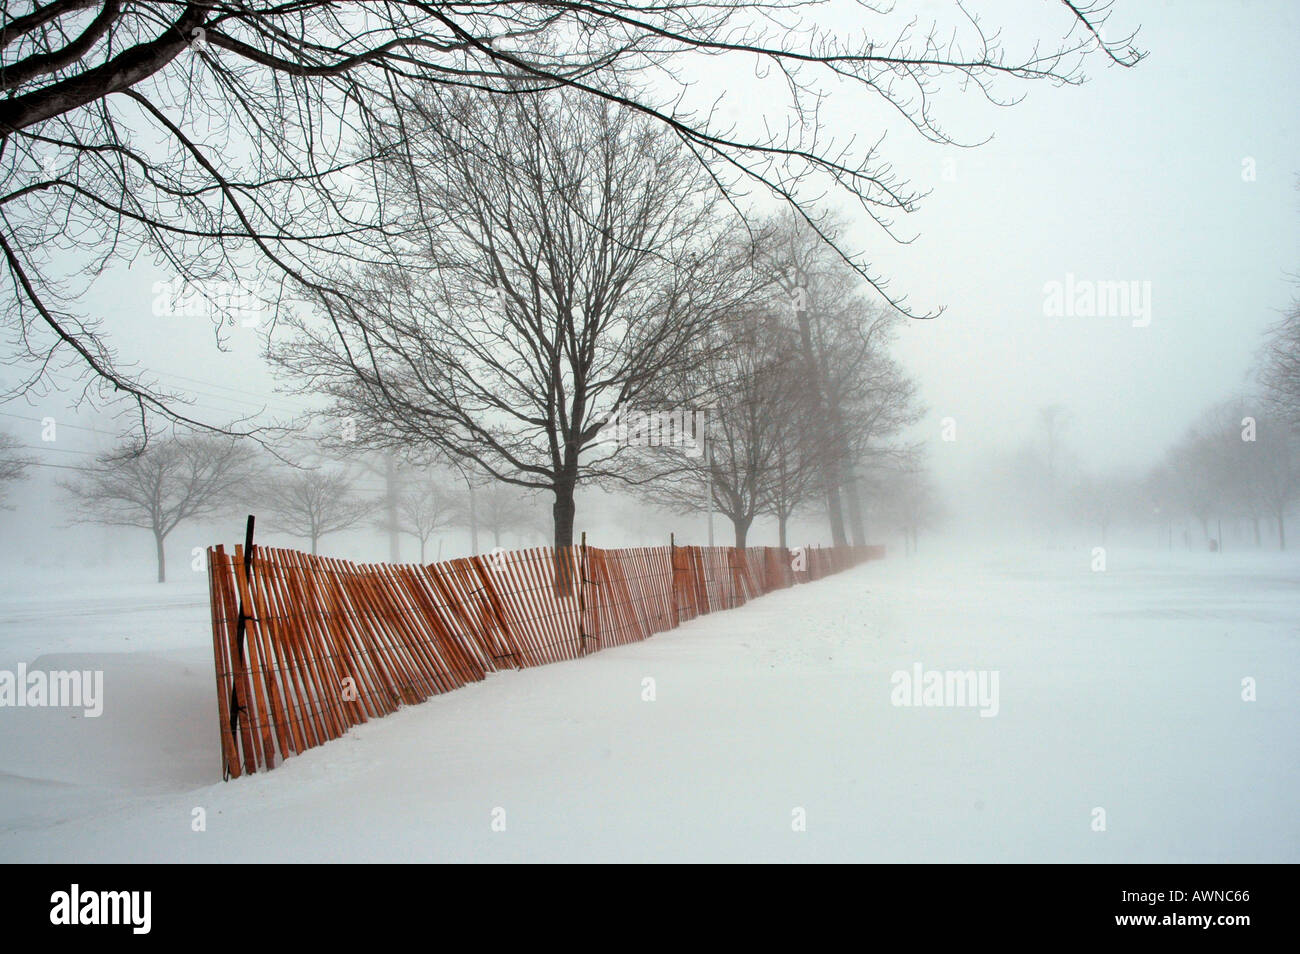 Blizzard snow conditions create a winter scenic along a snow fence in Port  Huron Michigan during winter time Stock Photo - Alamy